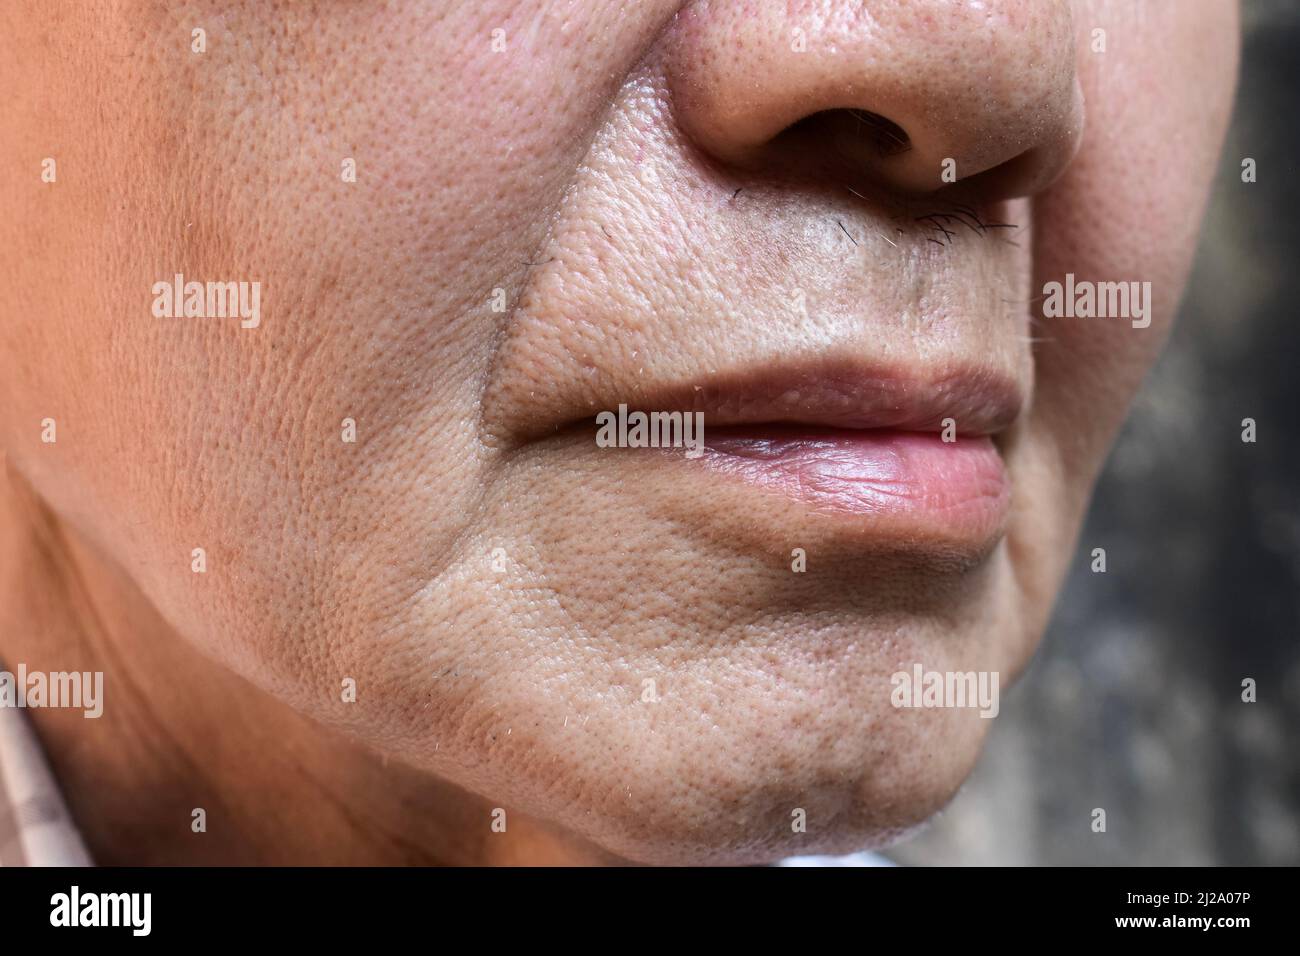 Enlarged pores in face of Southeast Asian, Chinese elder man with skin folds. Stock Photo